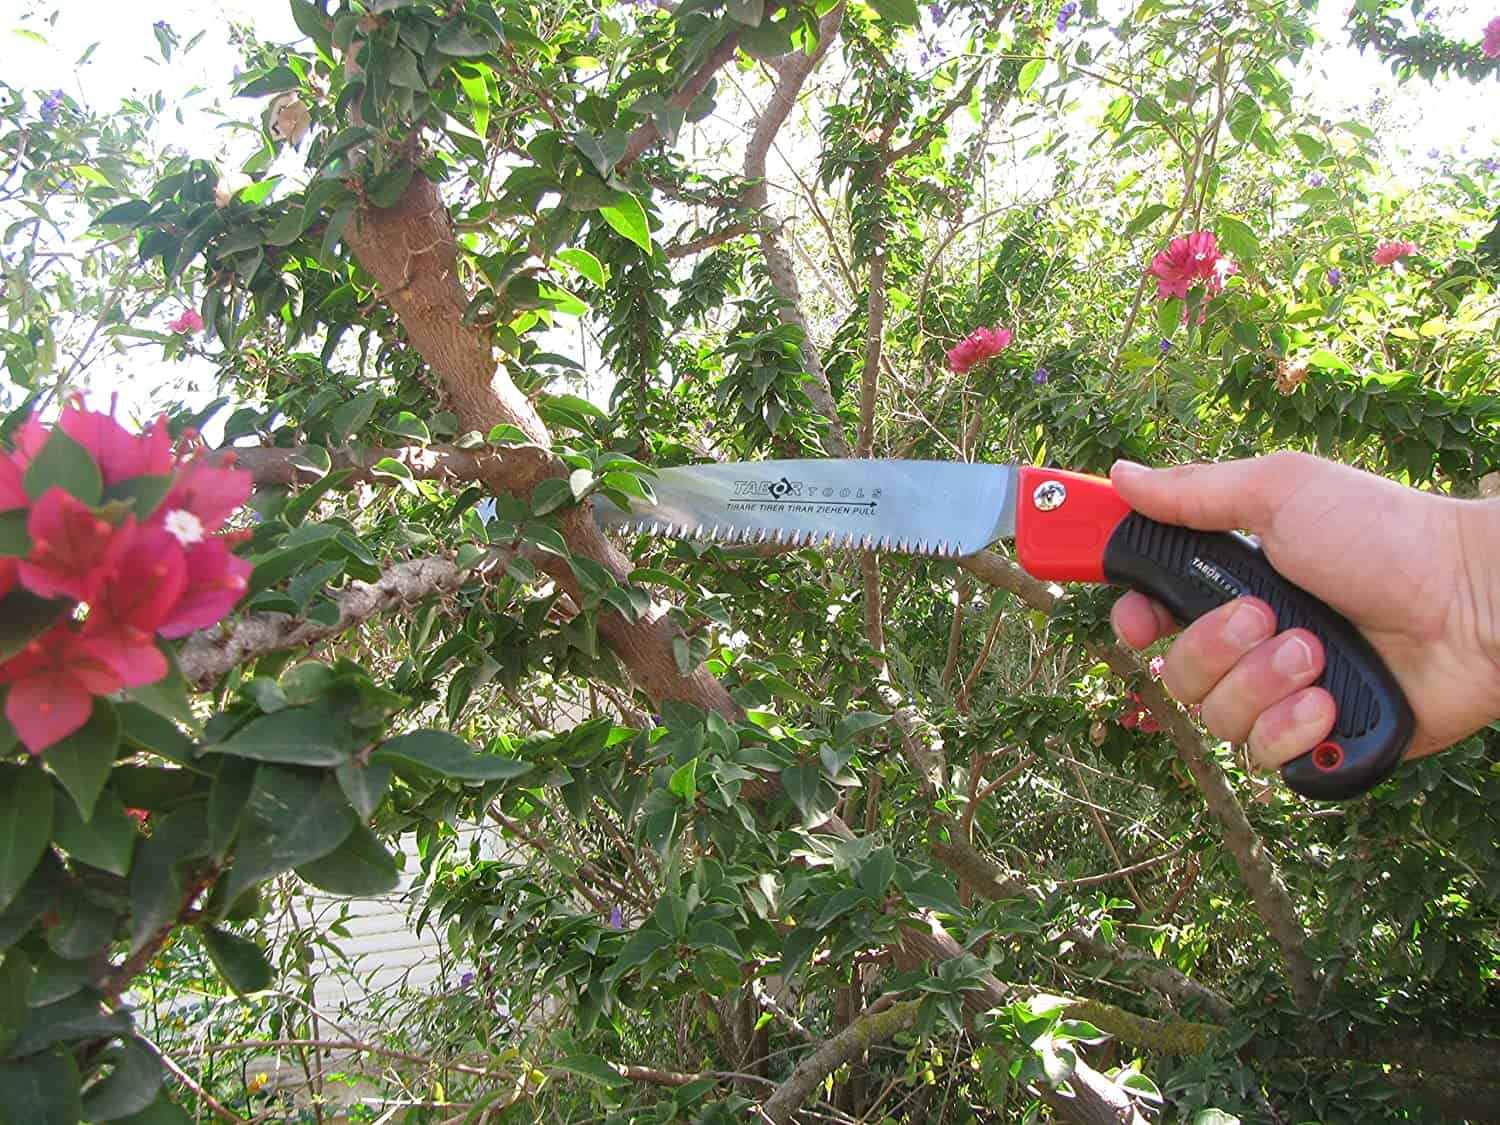 Best straight blade pruning saw for bush maintenance- TABOR TOOLS TTS32A 10 inch Saw with Sheath being used